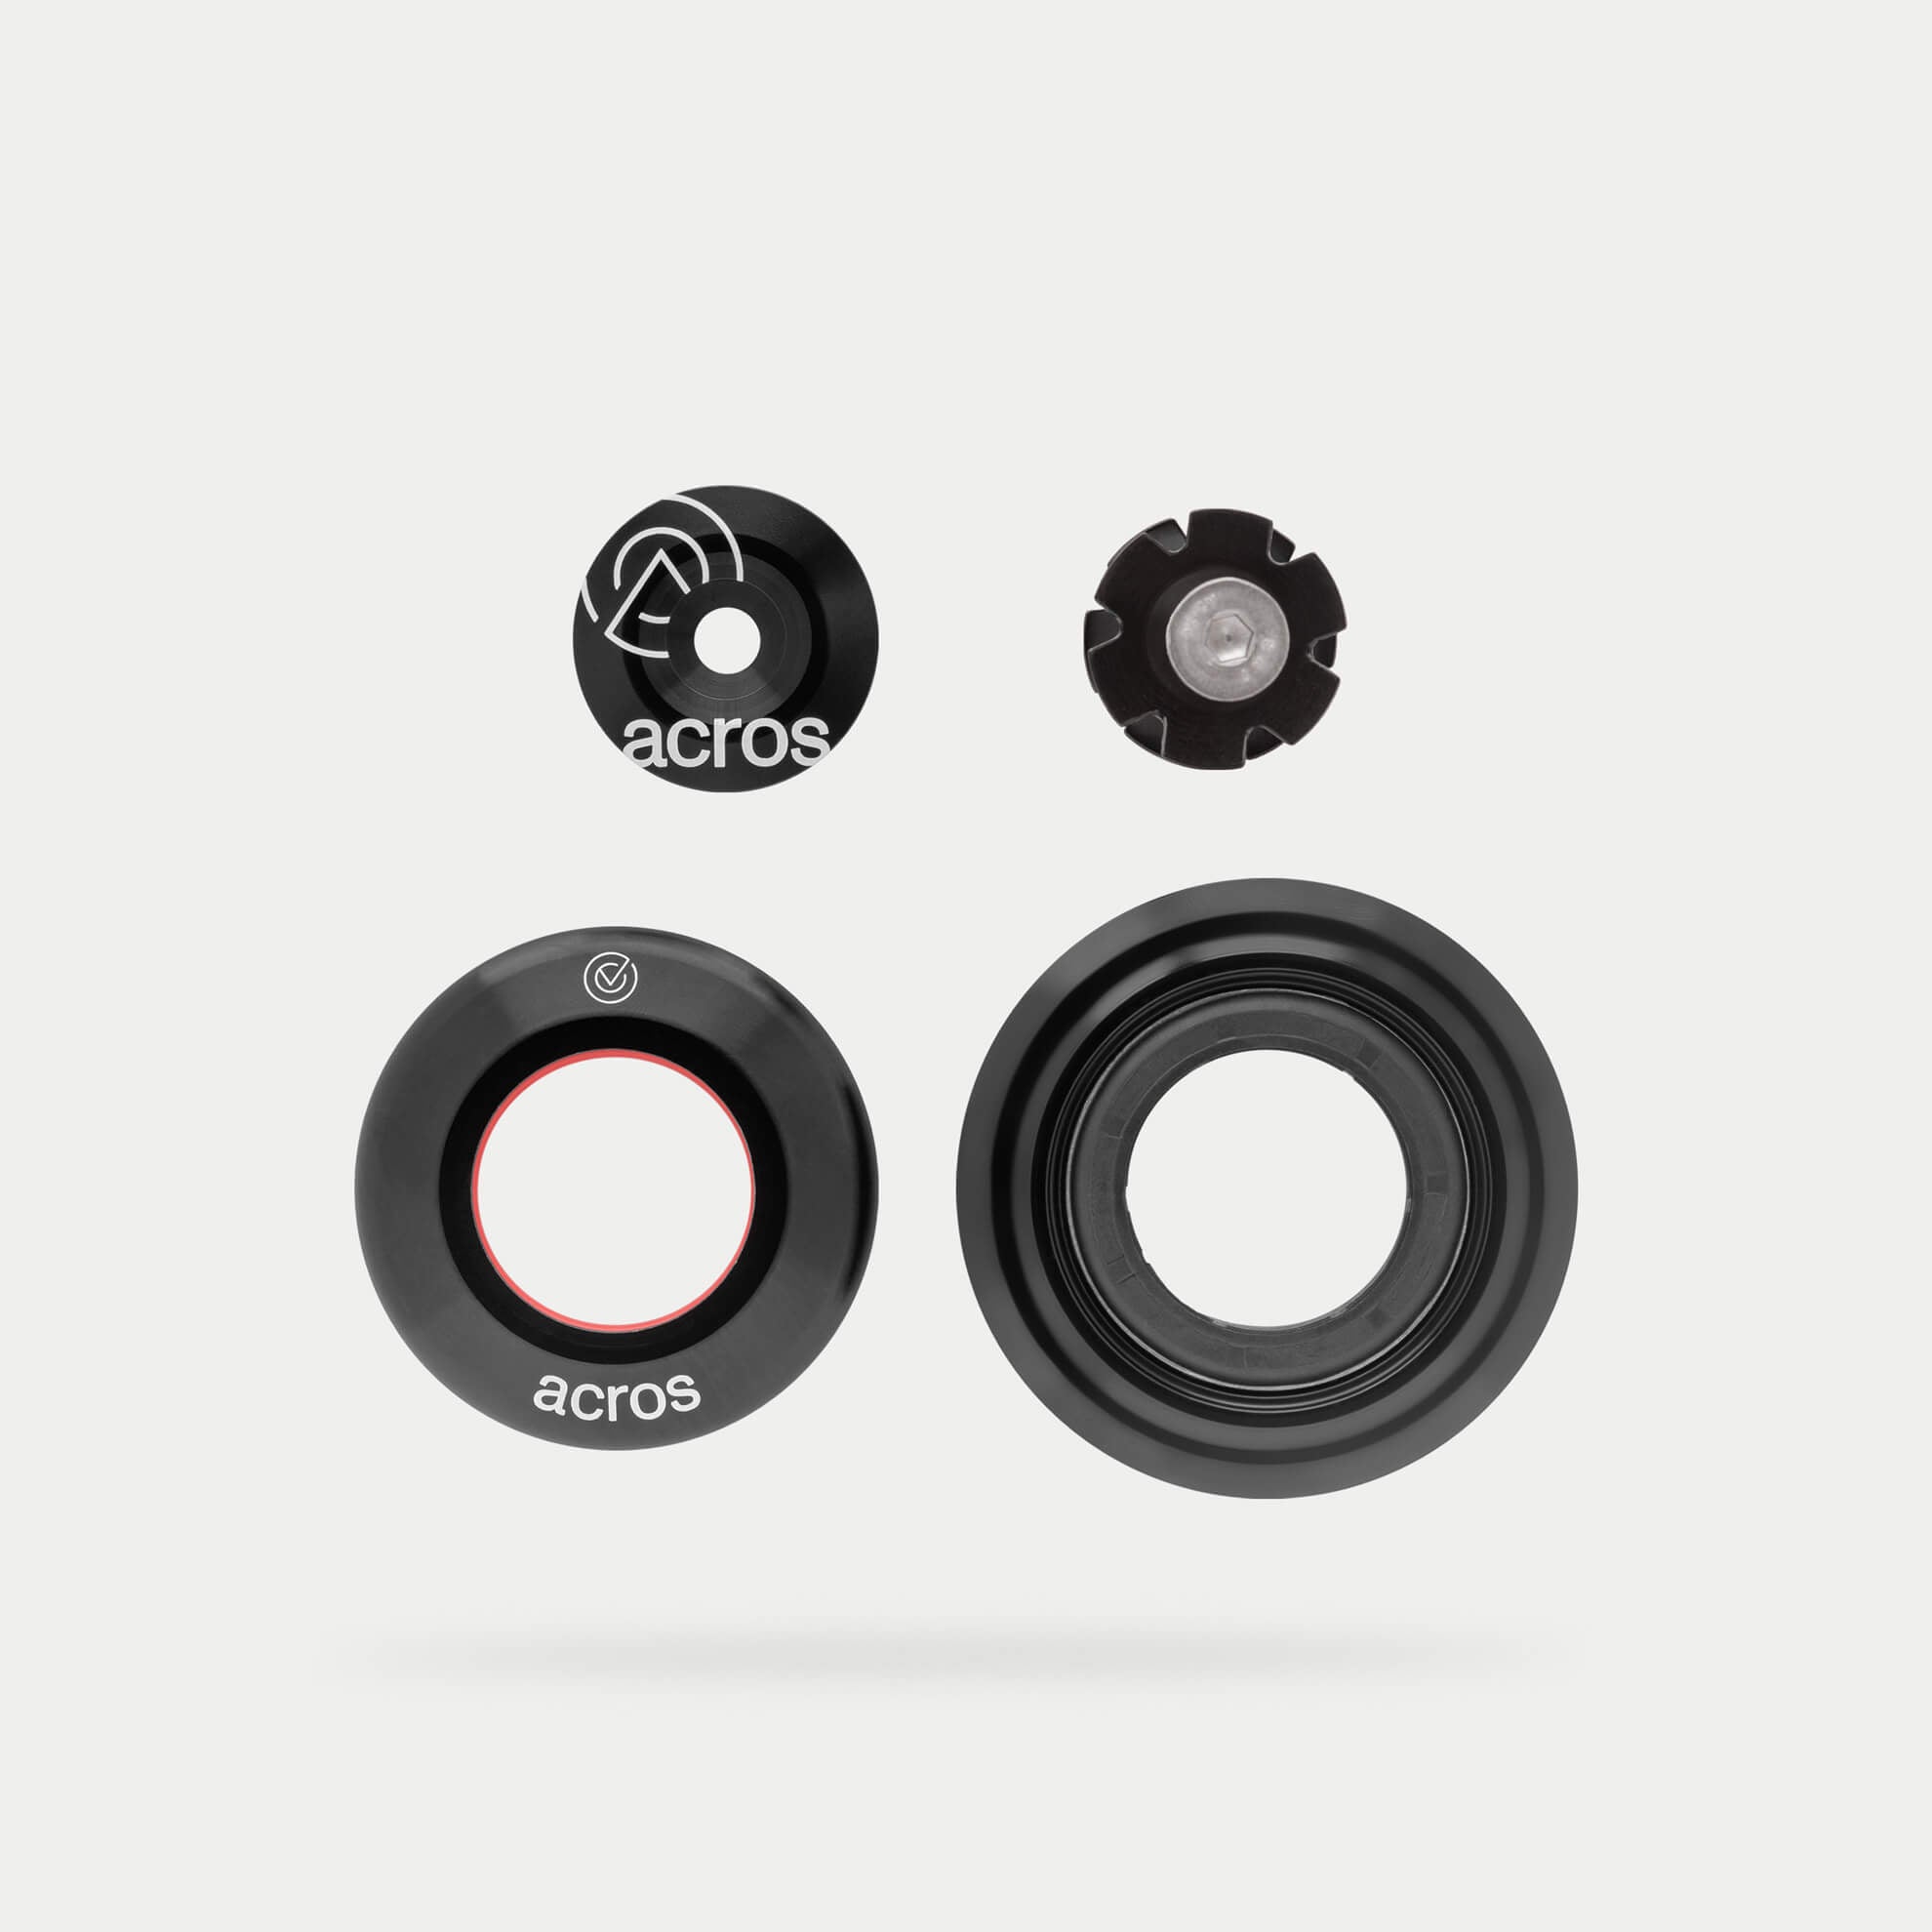 ACROS zs56 headset upper part od 62mm